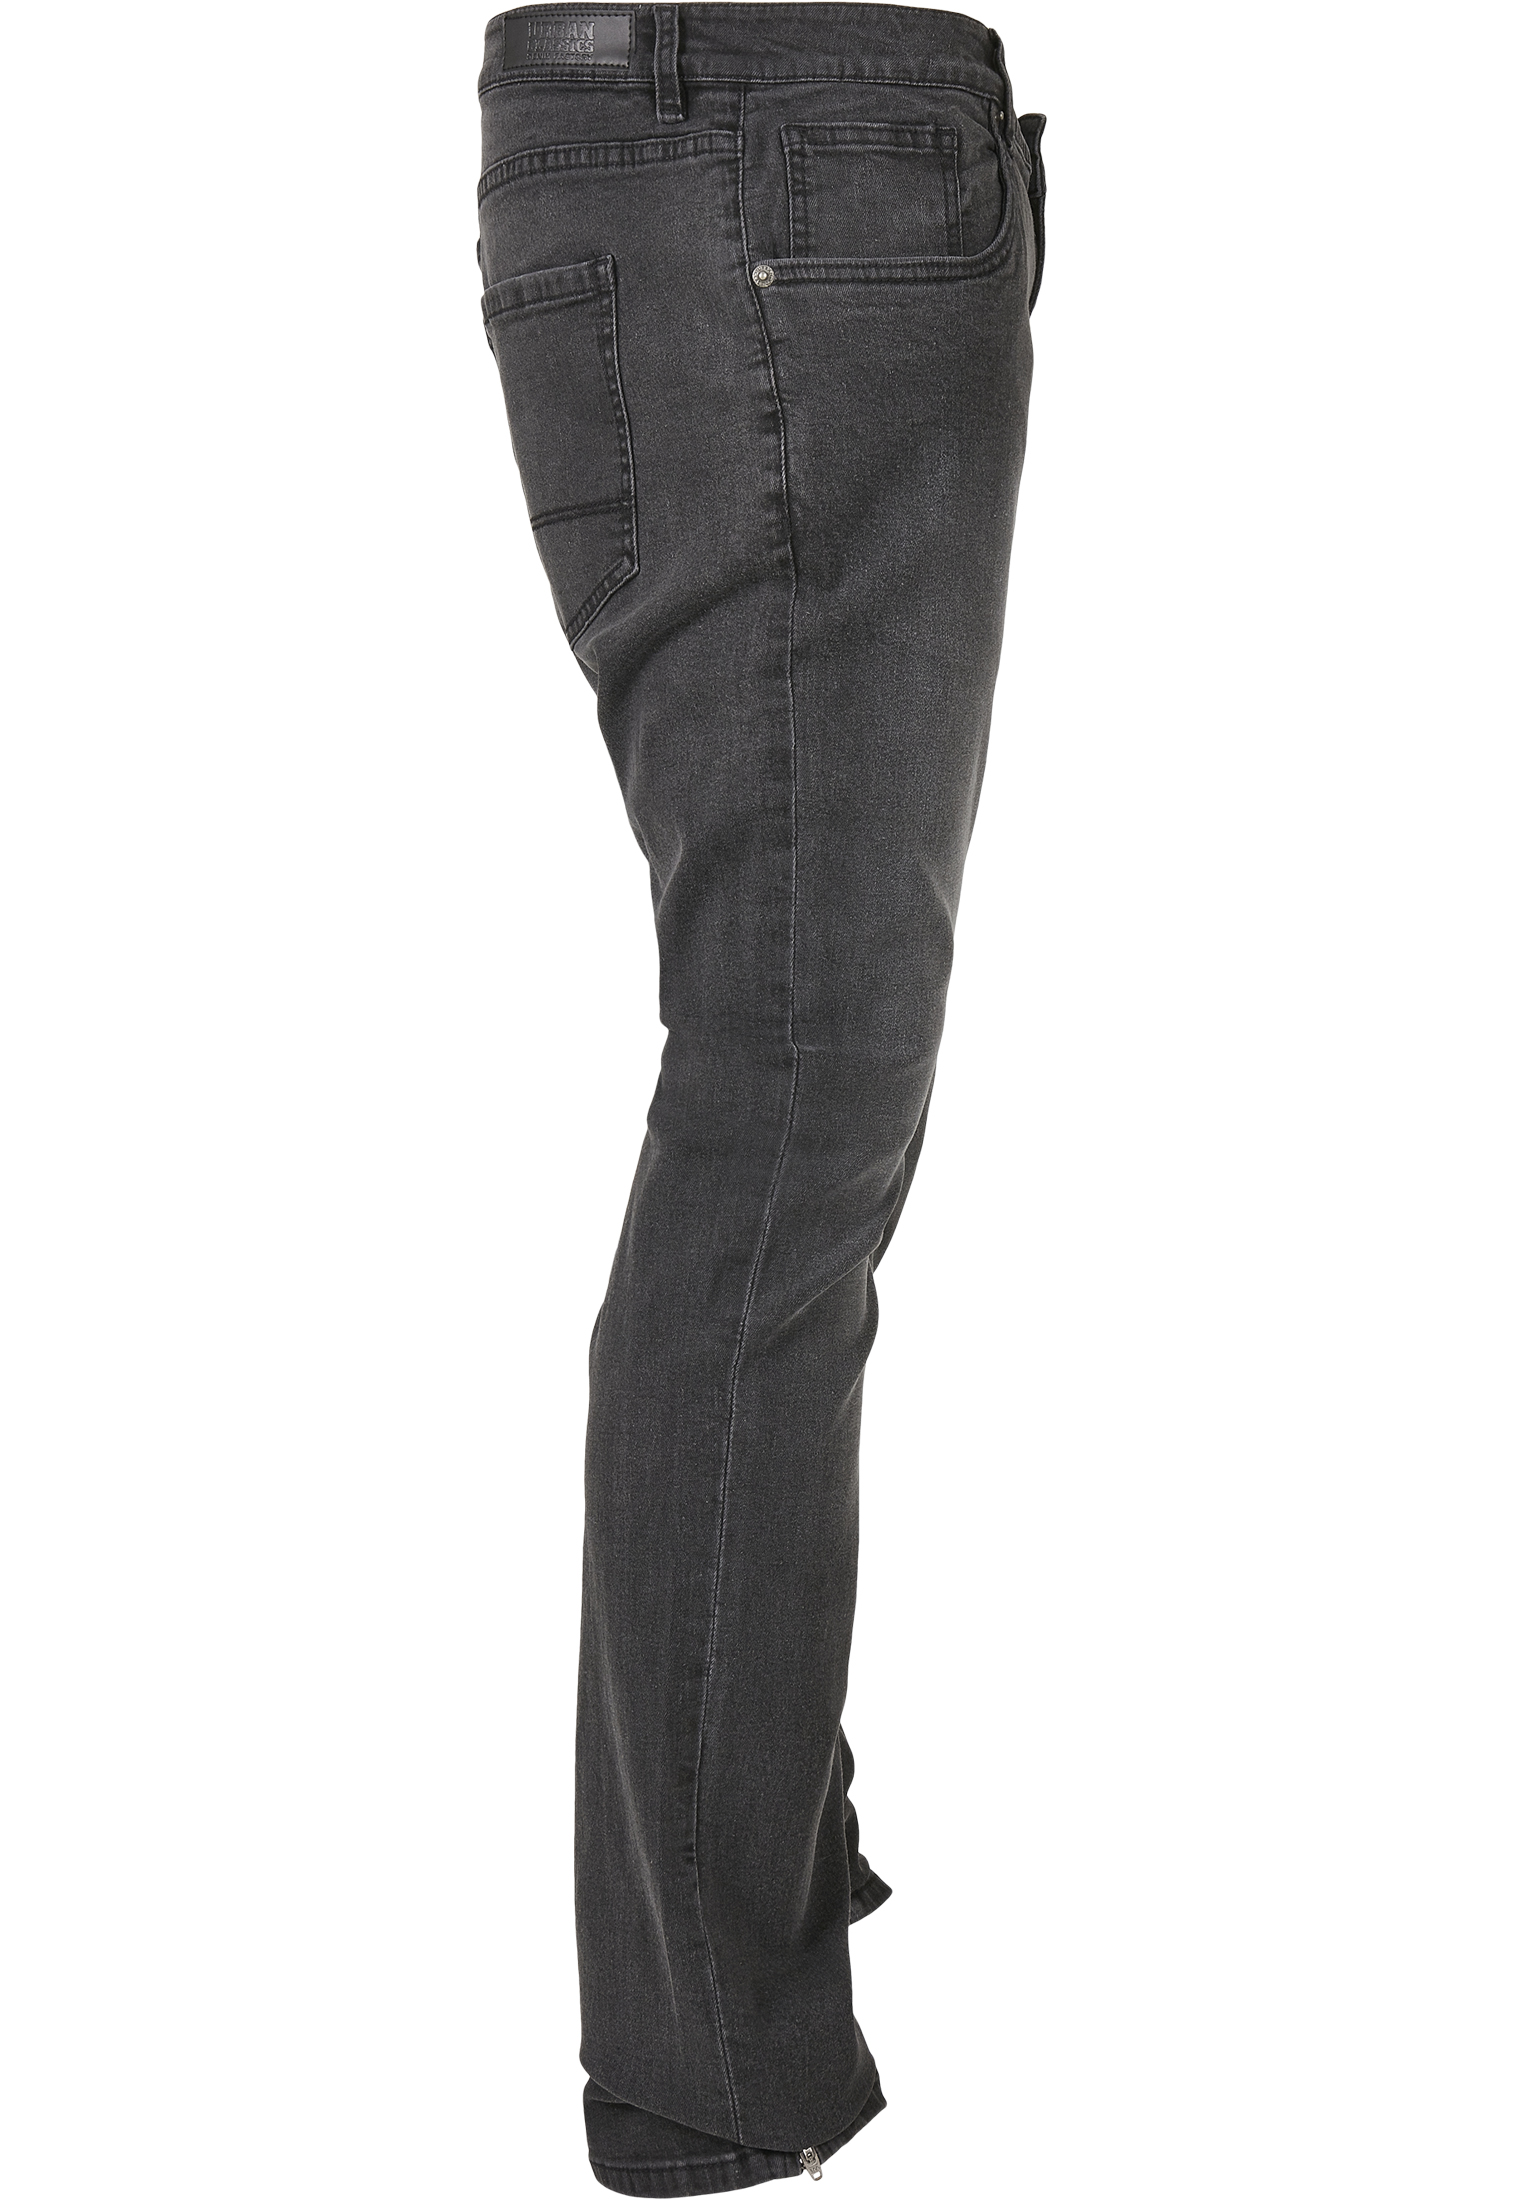 Hosen Slim Fit Zip Jeans in Farbe real black washed